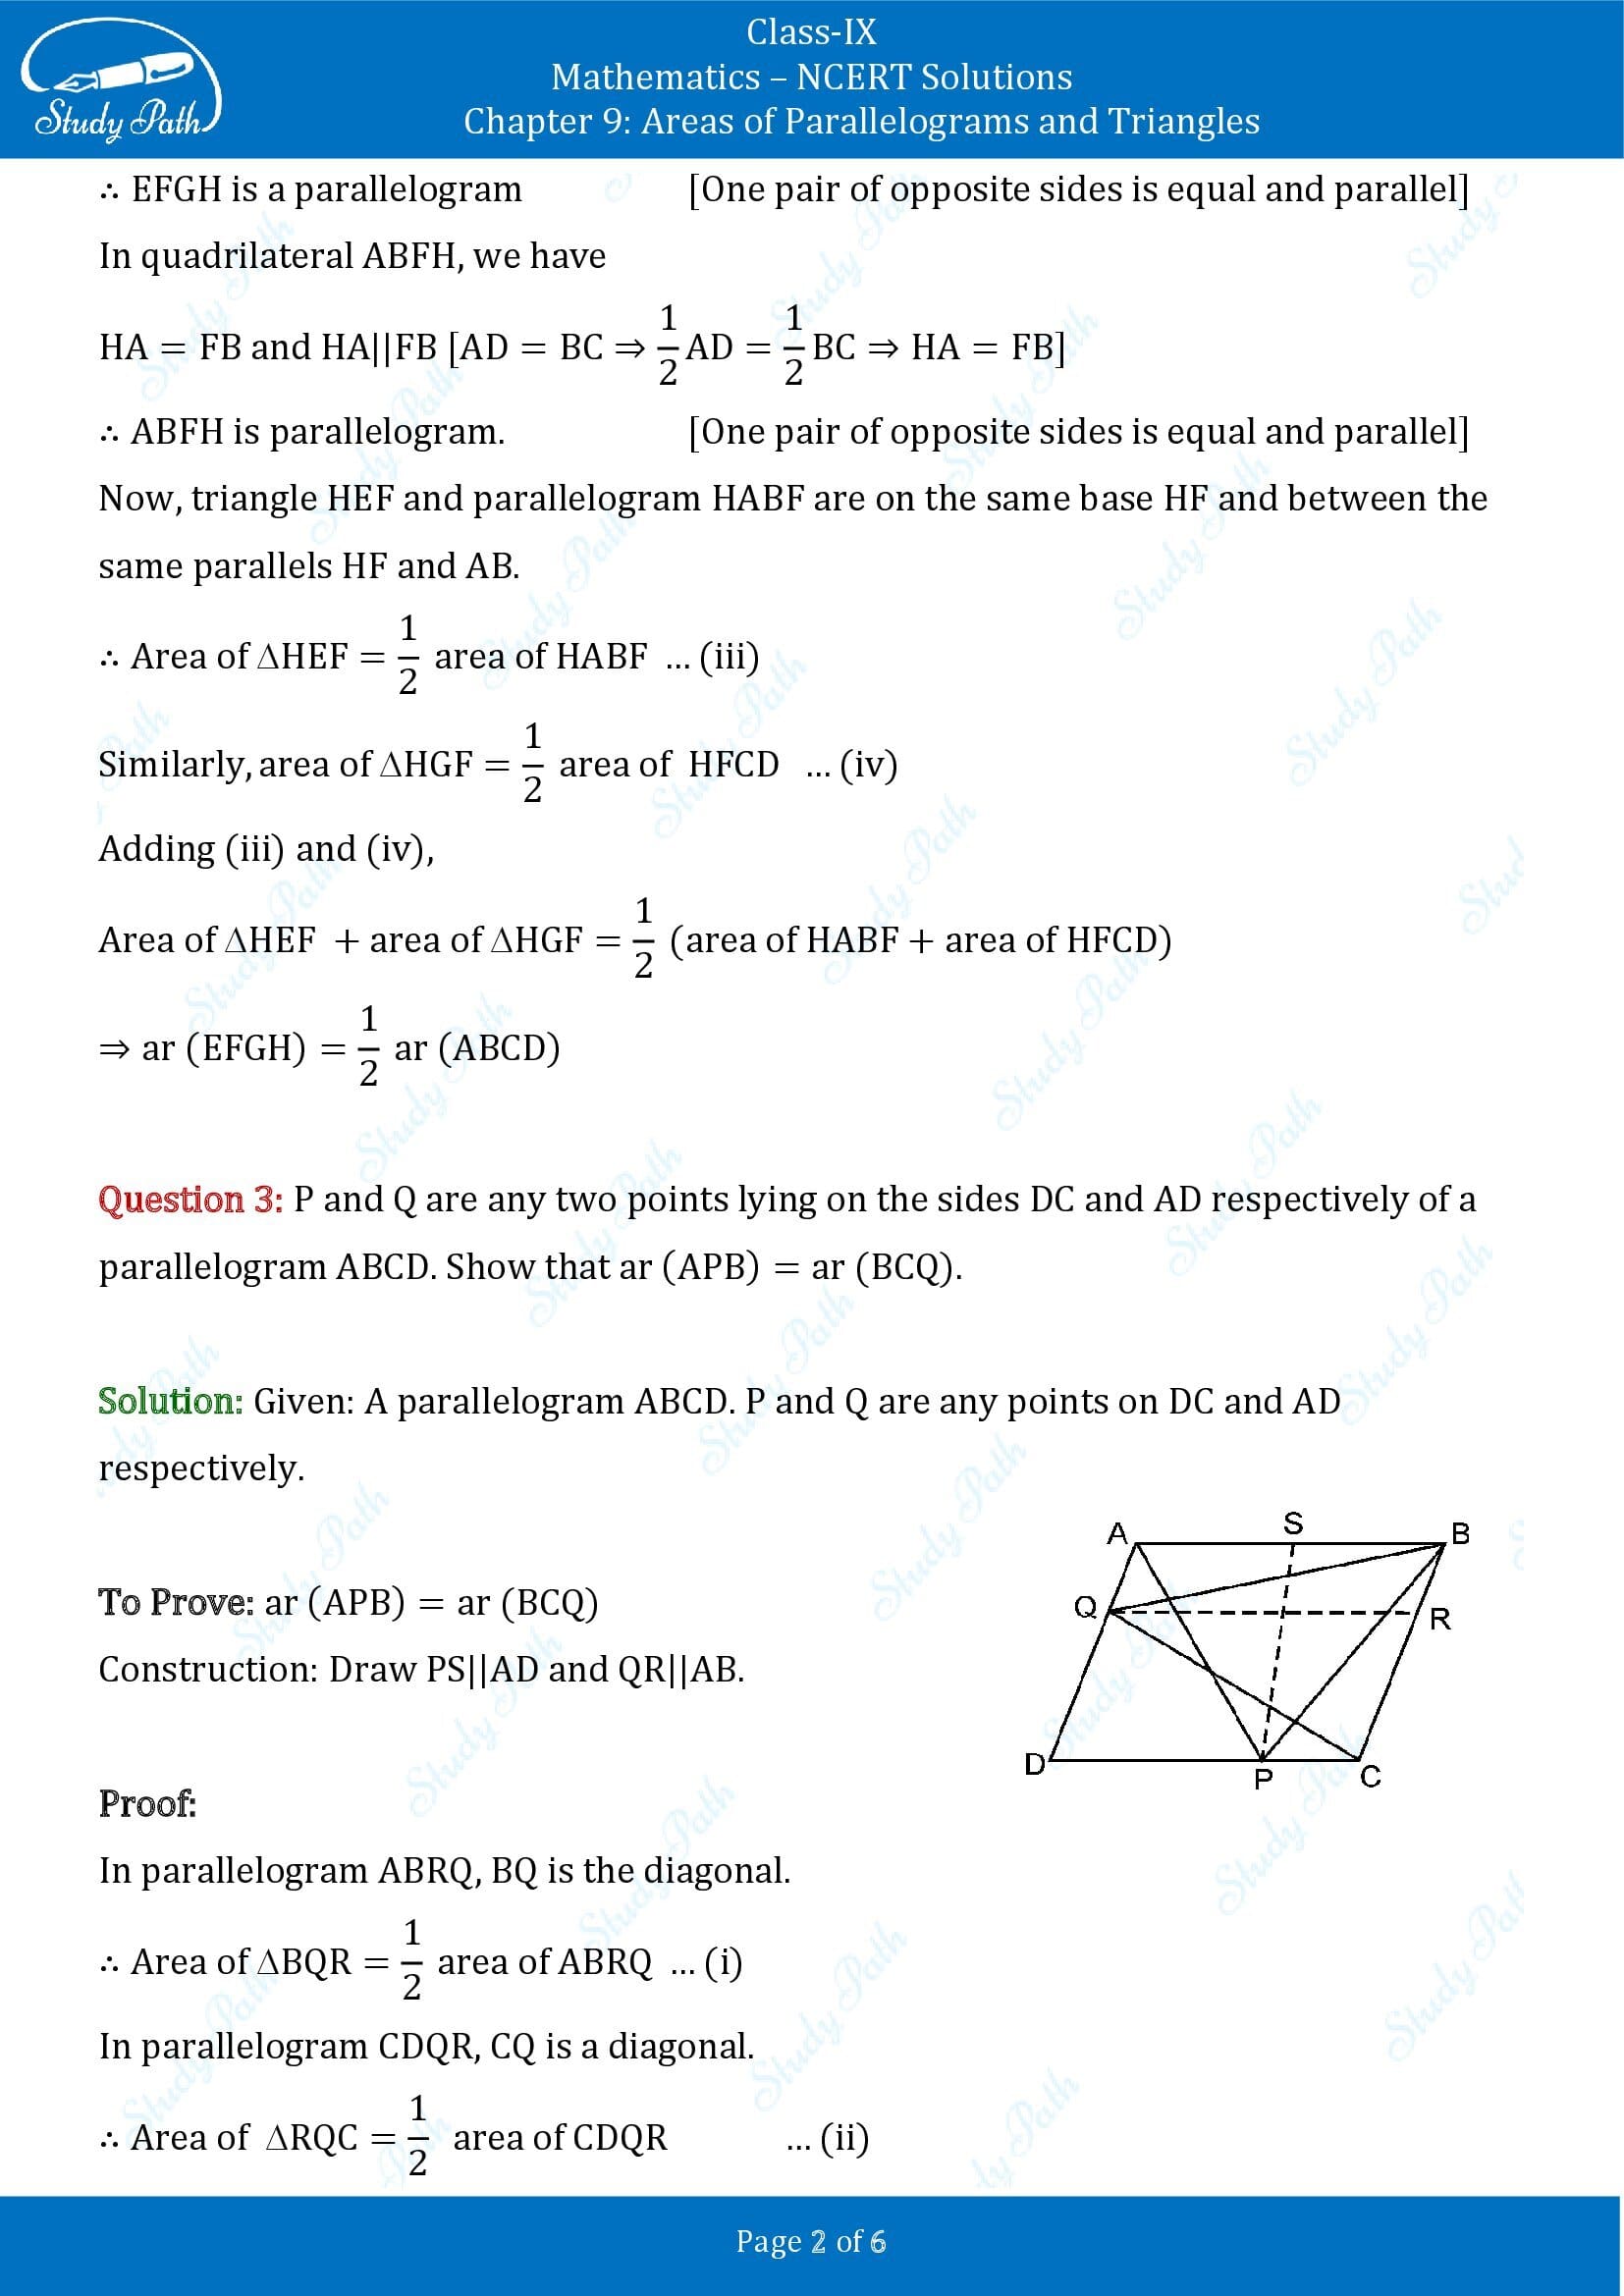 NCERT Solutions for Class 9 Maths Chapter 9 Areas of Parallelograms and Triangles Exercise 9.2 00002